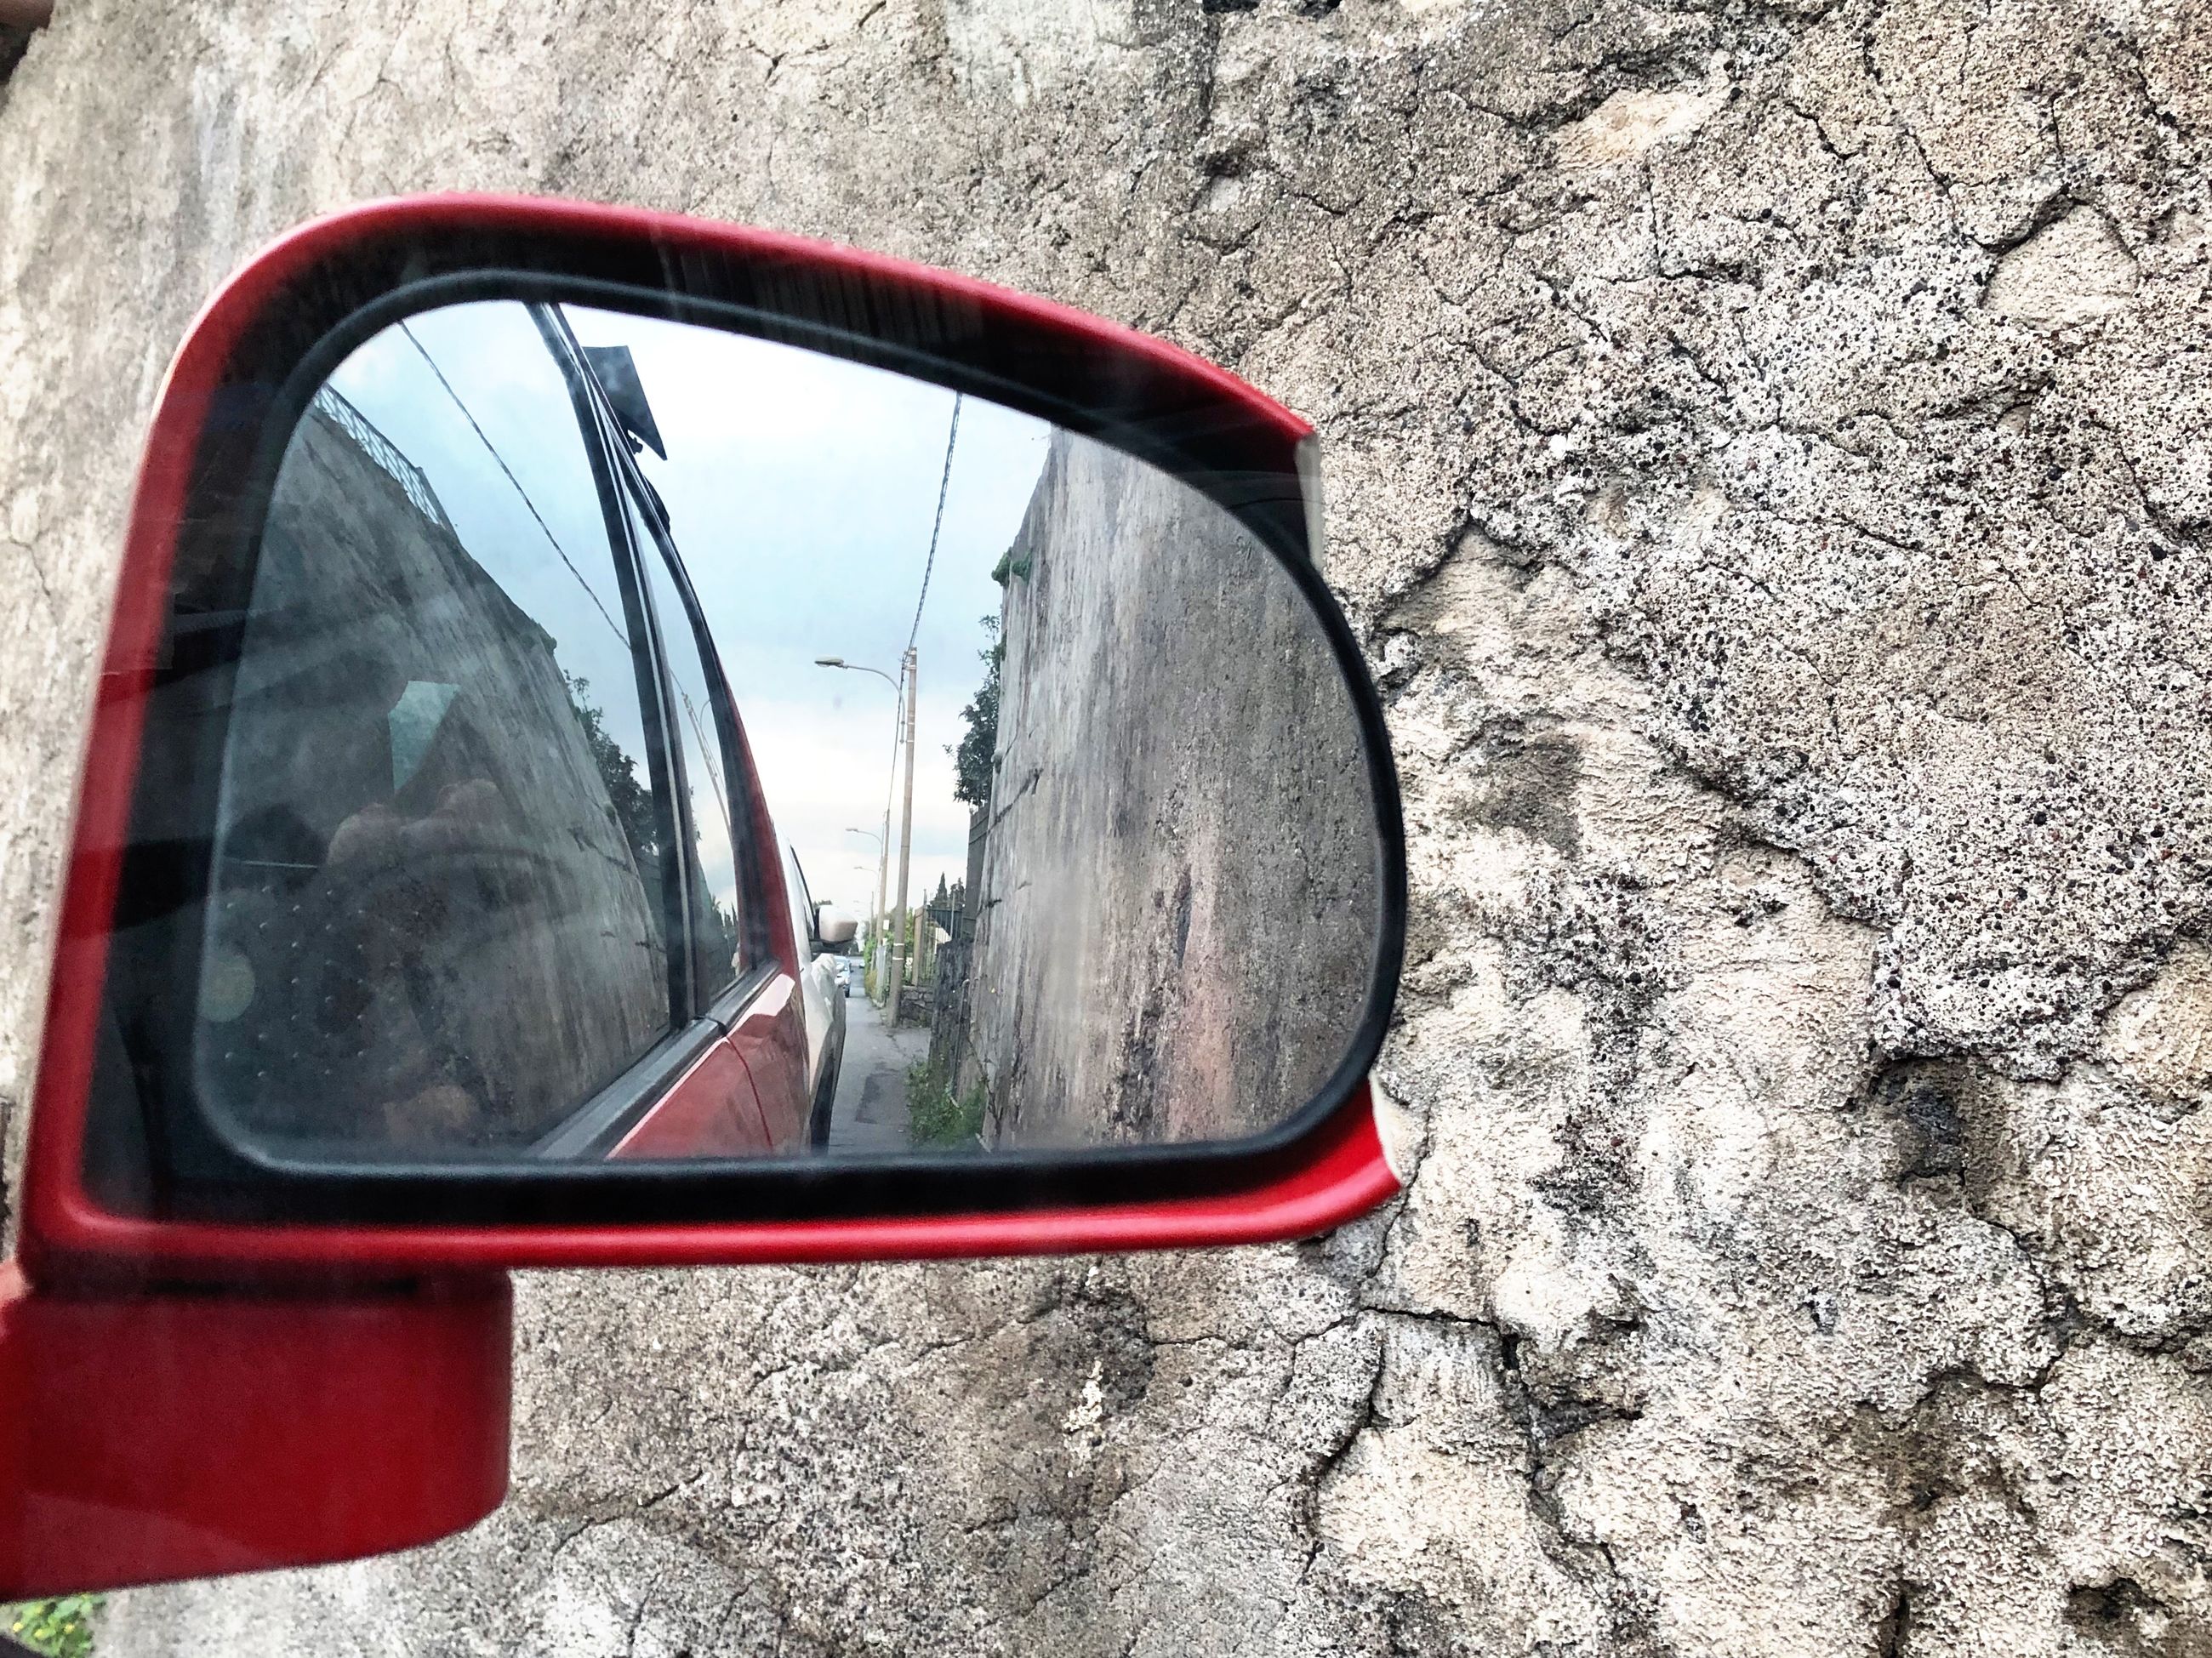 reflection, land vehicle, side-view mirror, mirror, mode of transportation, transportation, motor vehicle, car, day, road, close-up, glass - material, no people, outdoors, nature, travel, city, street, red, rear-view mirror, vehicle mirror